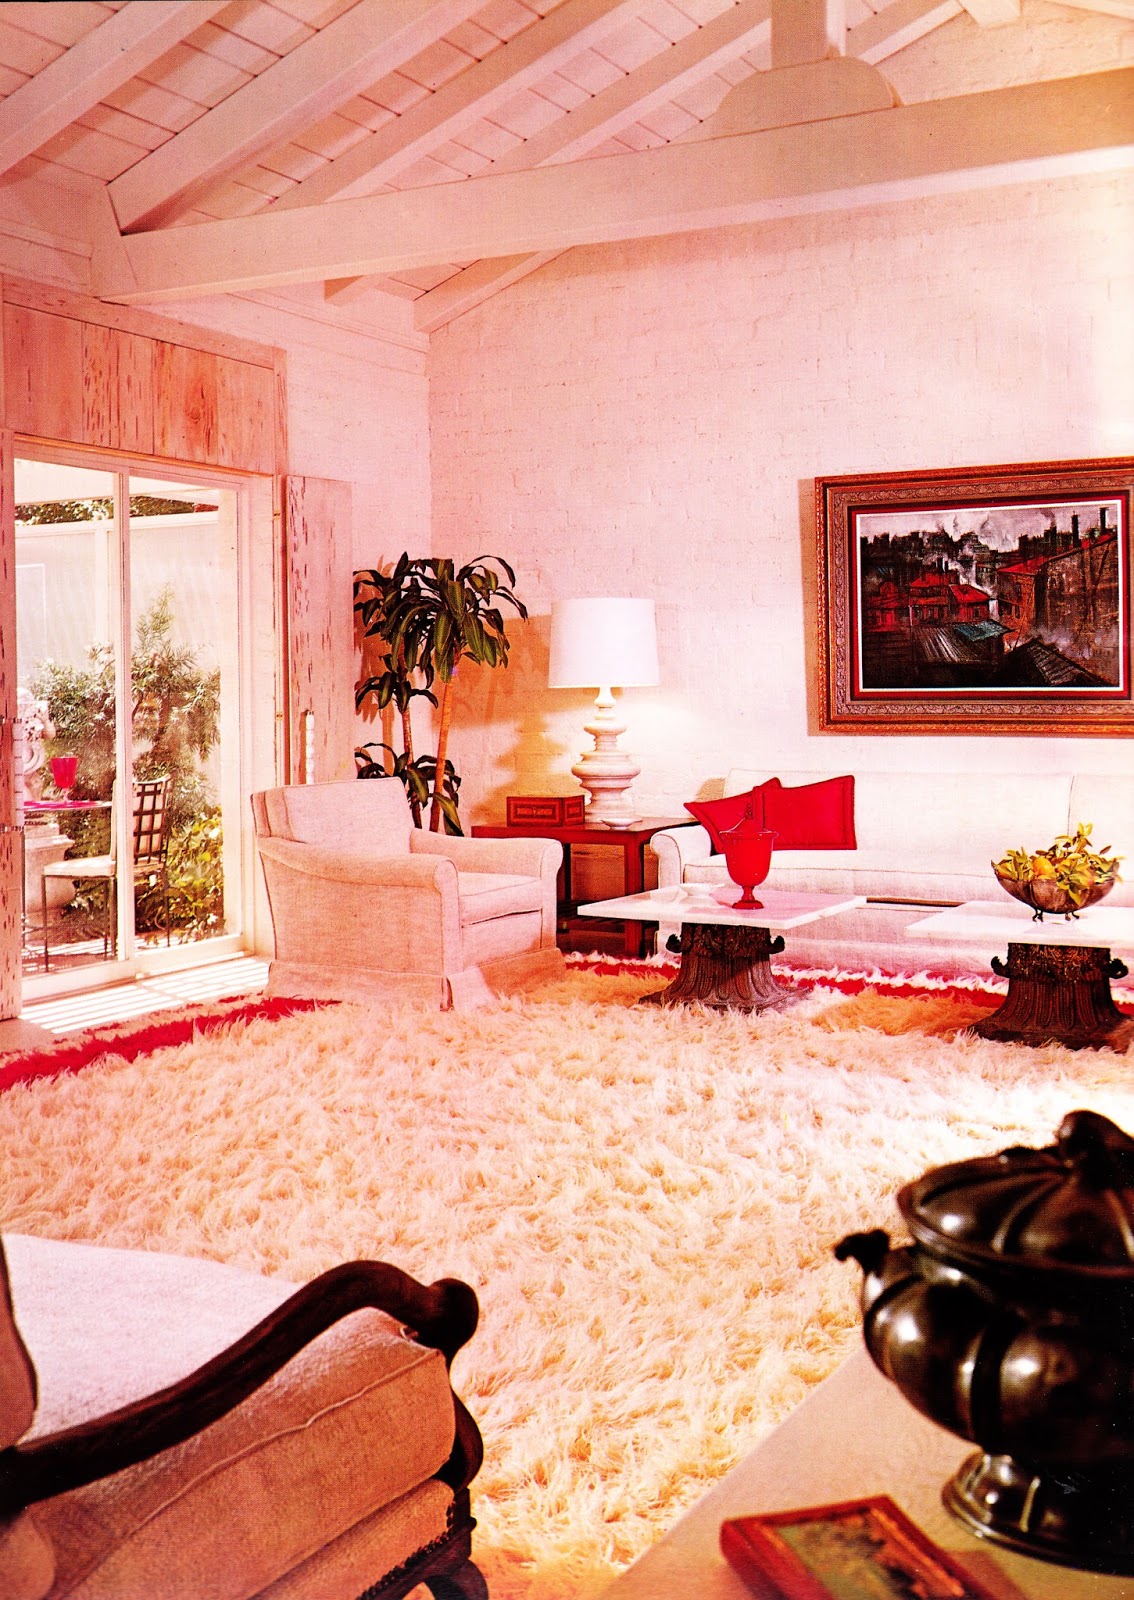 1960s Interior D cor The Decade of Psychedelia Gave Rise 